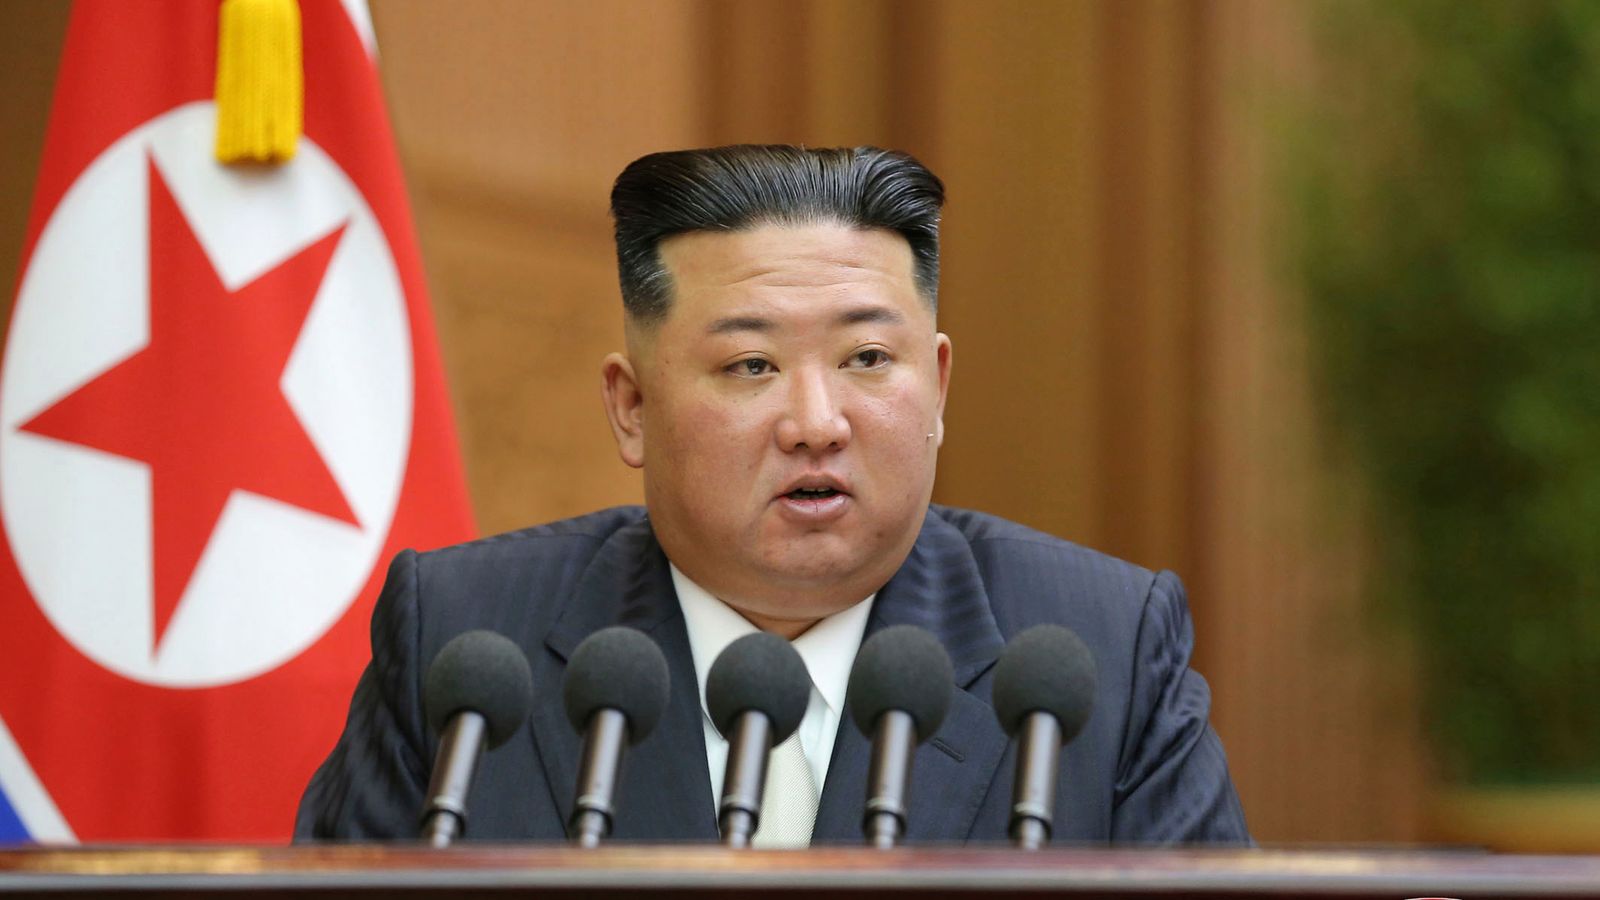 North Korean state media urges rejection of 'poisoned candy' foreign aid despite food shortages